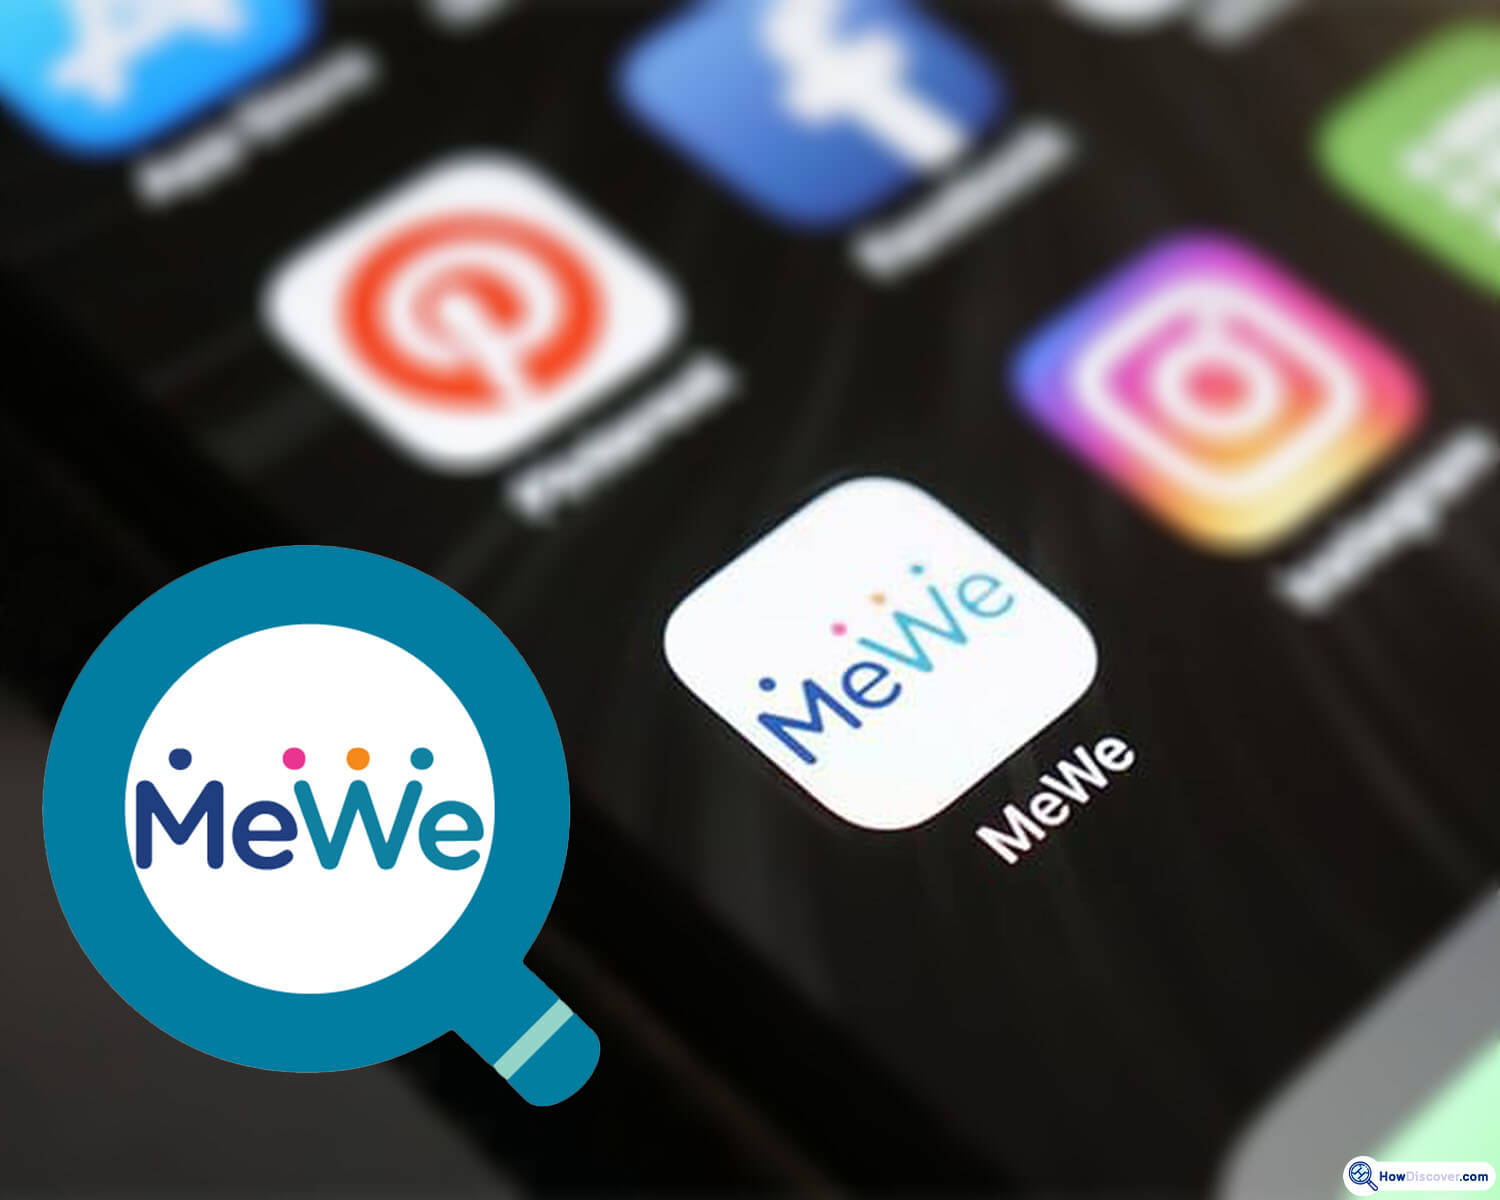 MeWe - What Are The Instagram Alternatives